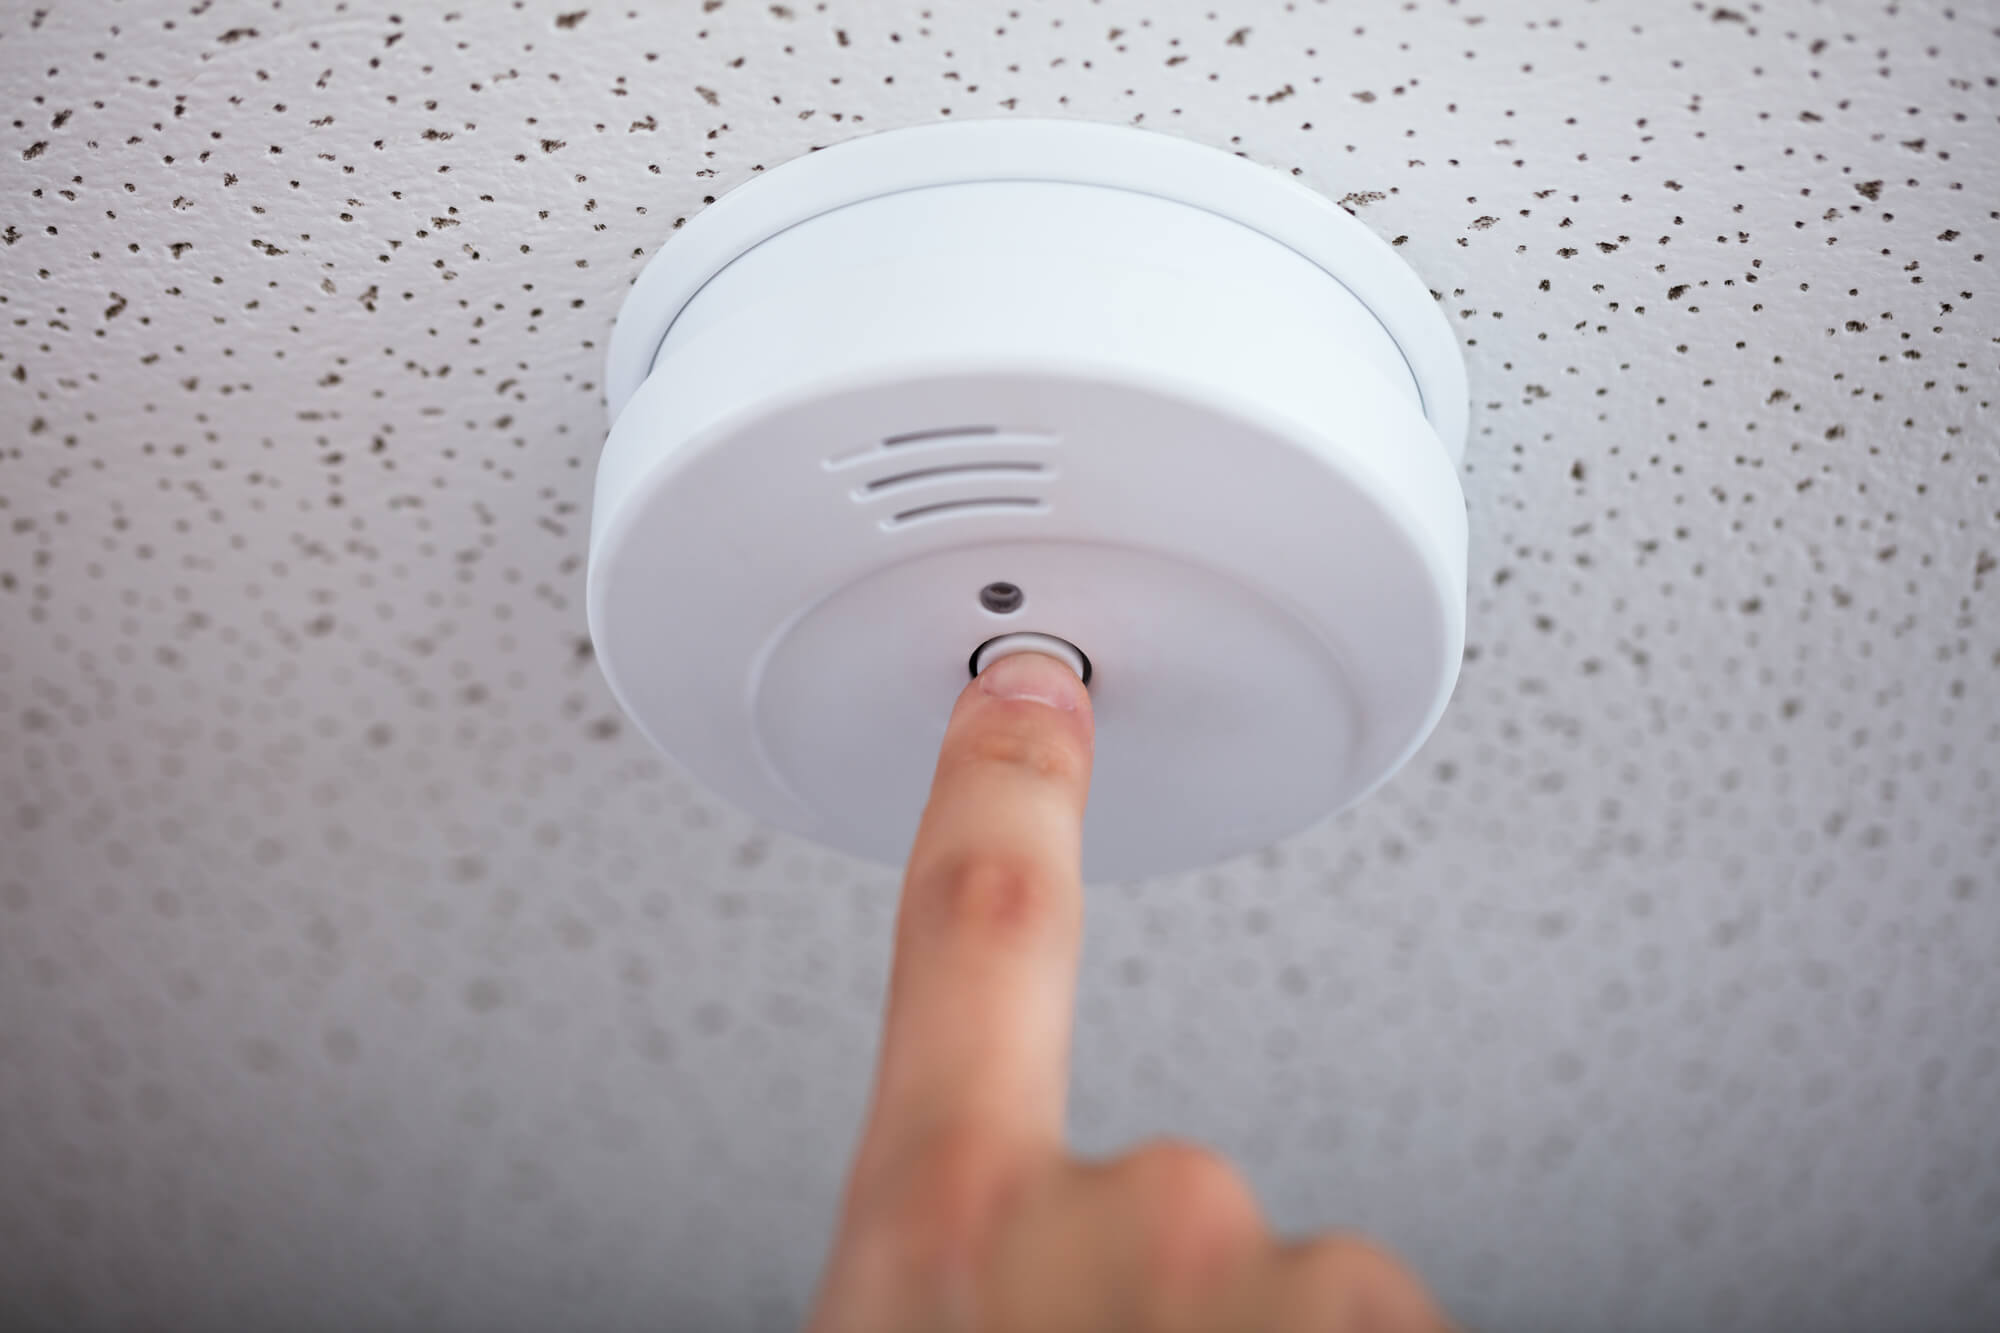 How To Turn Off A Wired Smoke Detector